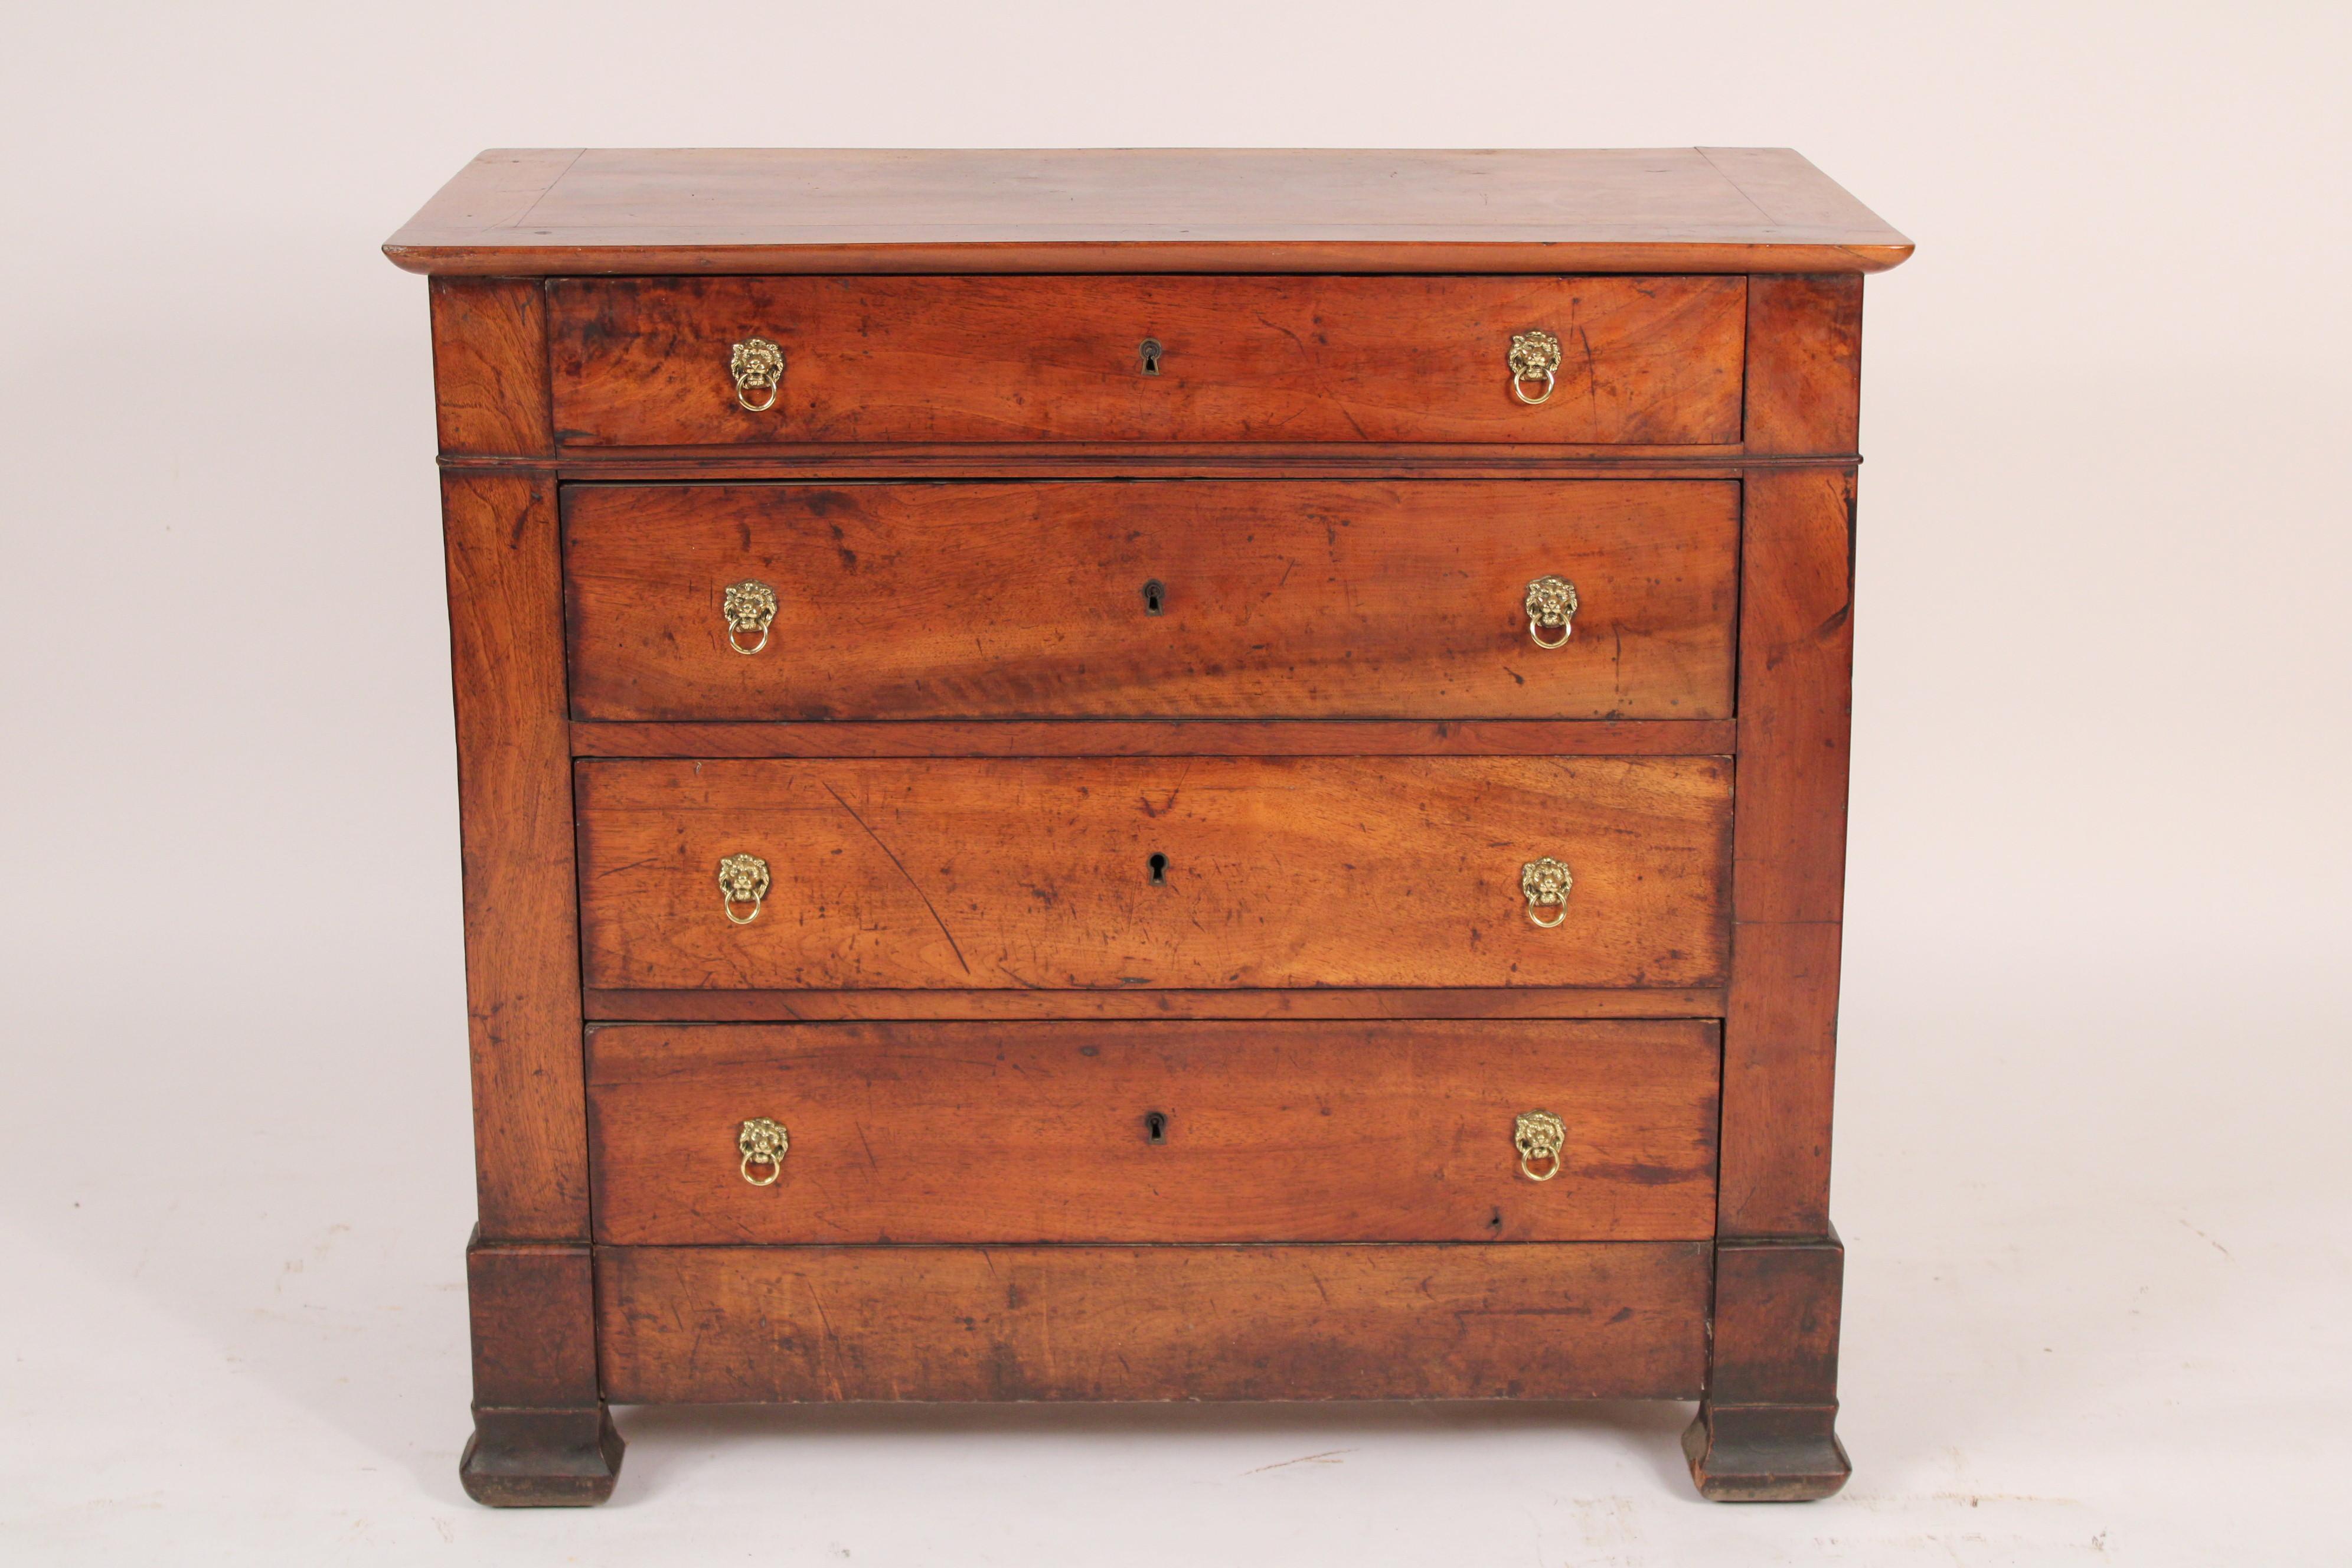 Louis Philippe mahogany chest of drawers, circa 1845. With a rectangular overhanging top and 4 drawers. Excellent original old patina. Hand dovetailed drawer construction.